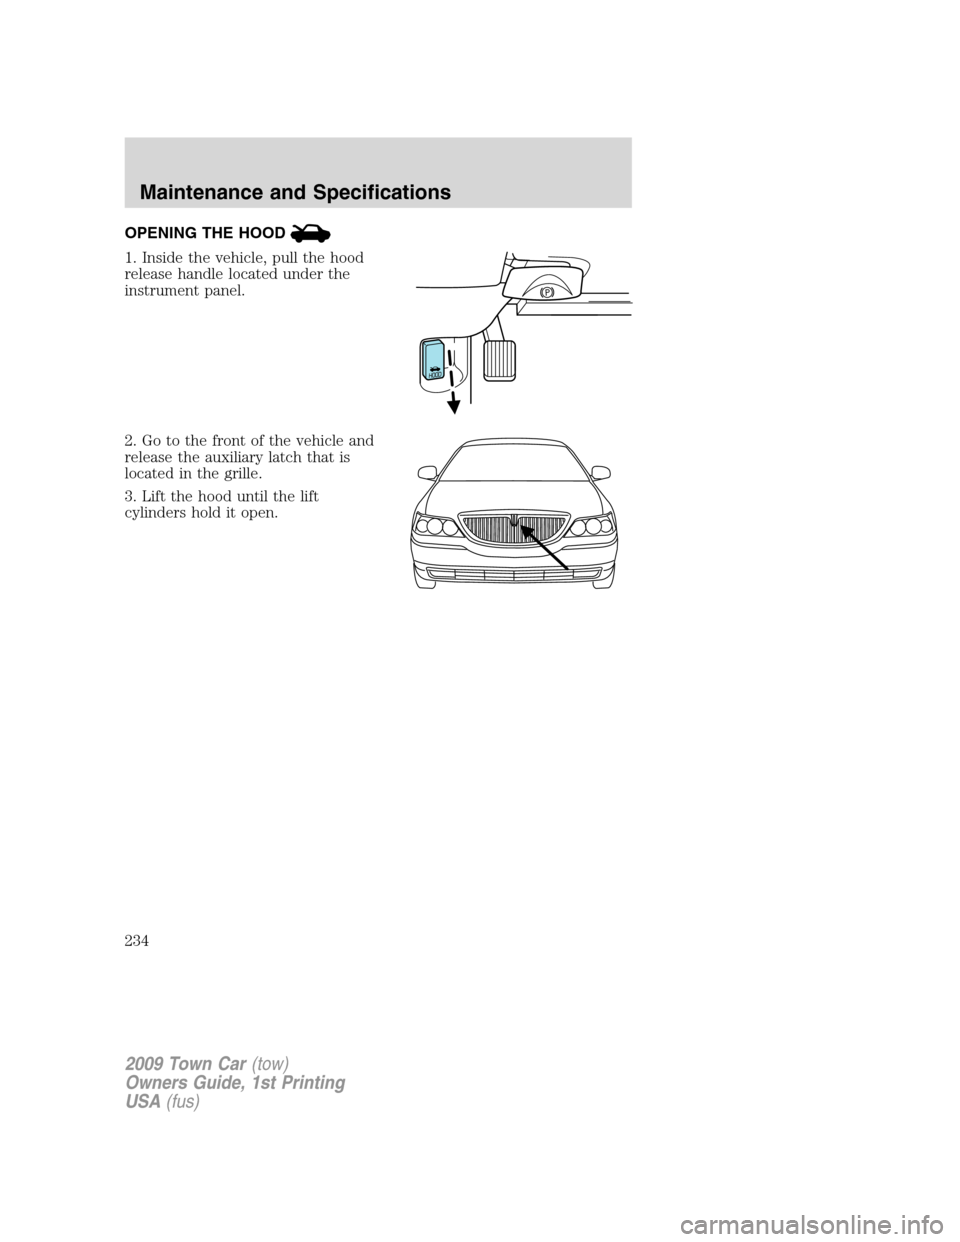 LINCOLN TOWN CAR 2009  Owners Manual OPENING THE HOOD
1. Inside the vehicle, pull the hood
release handle located under the
instrument panel.
2. Go to the front of the vehicle and
release the auxiliary latch that is
located in the grille